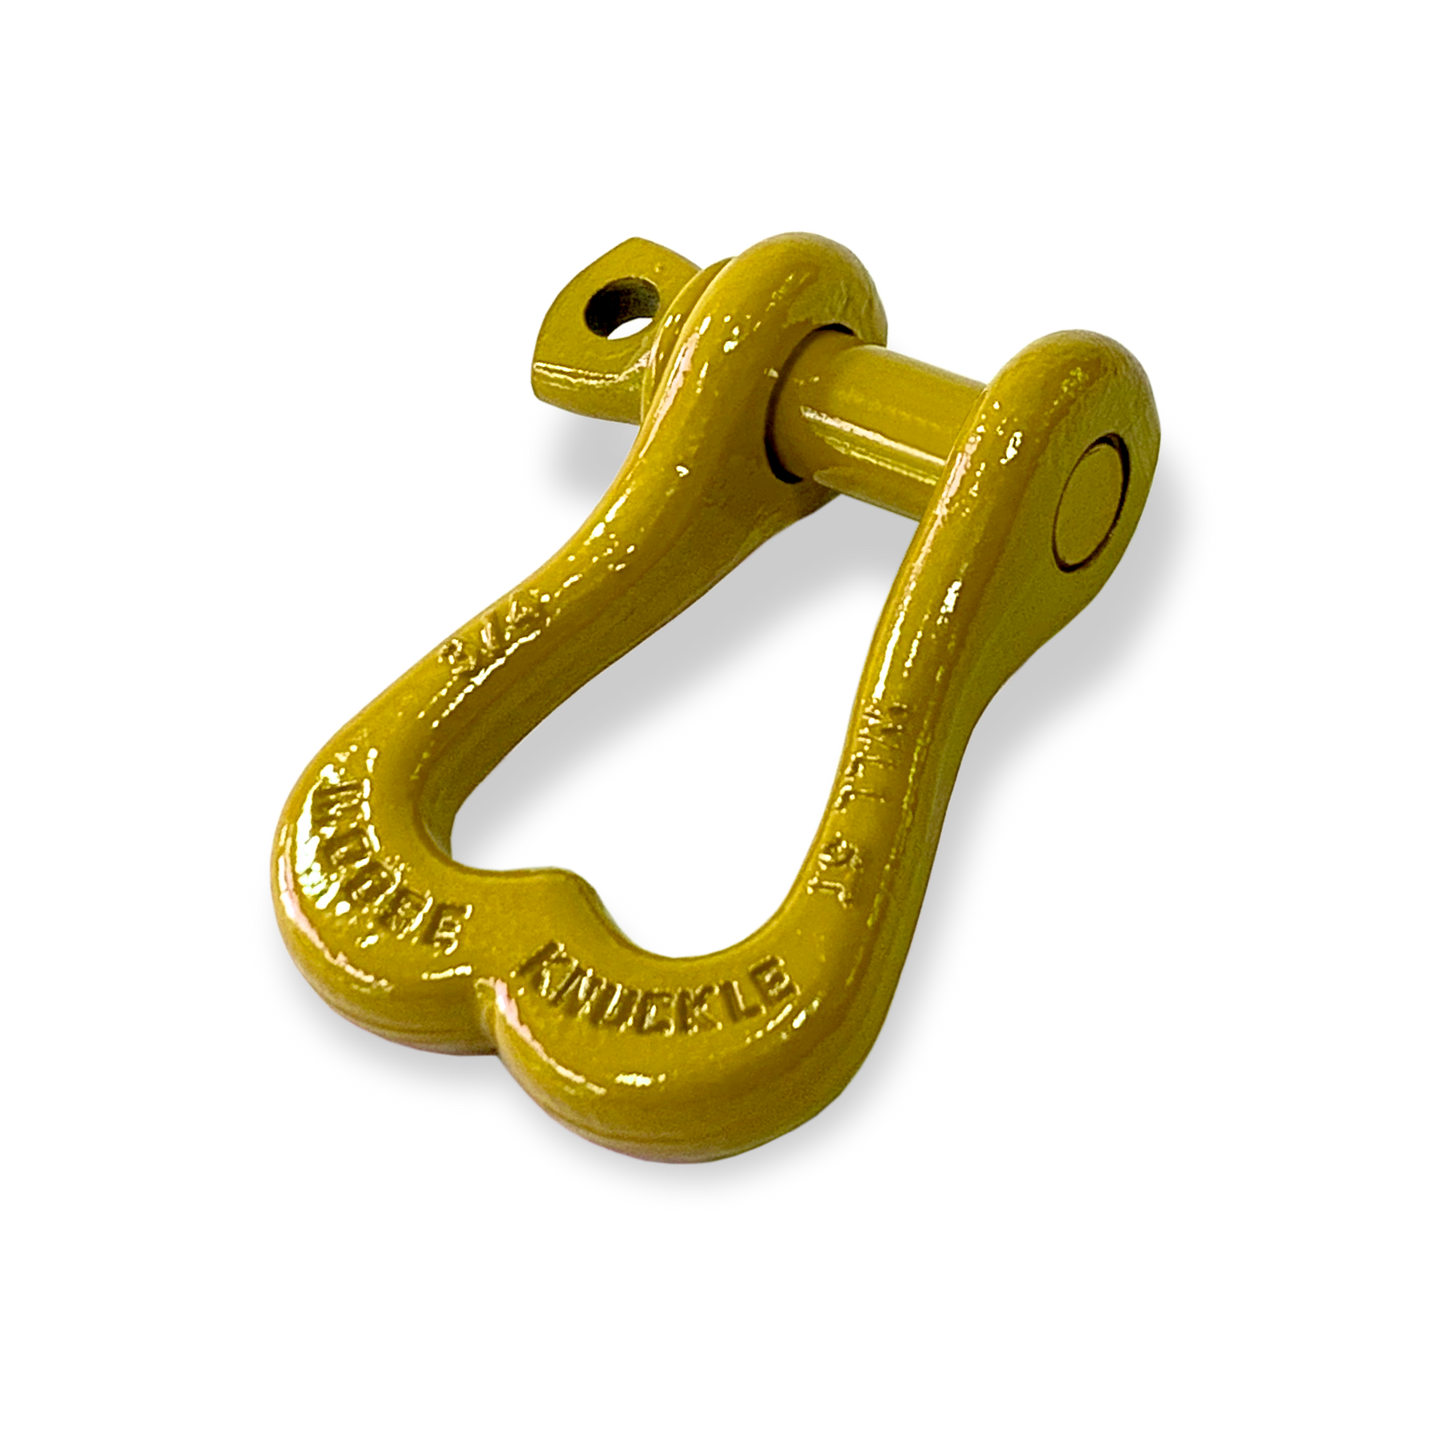 Moose Knuckle XL Detonator Yellow Powder Coated Colored Shackle for Tow Straps, Off Roading and Truck Nuts Vehicle Recovery